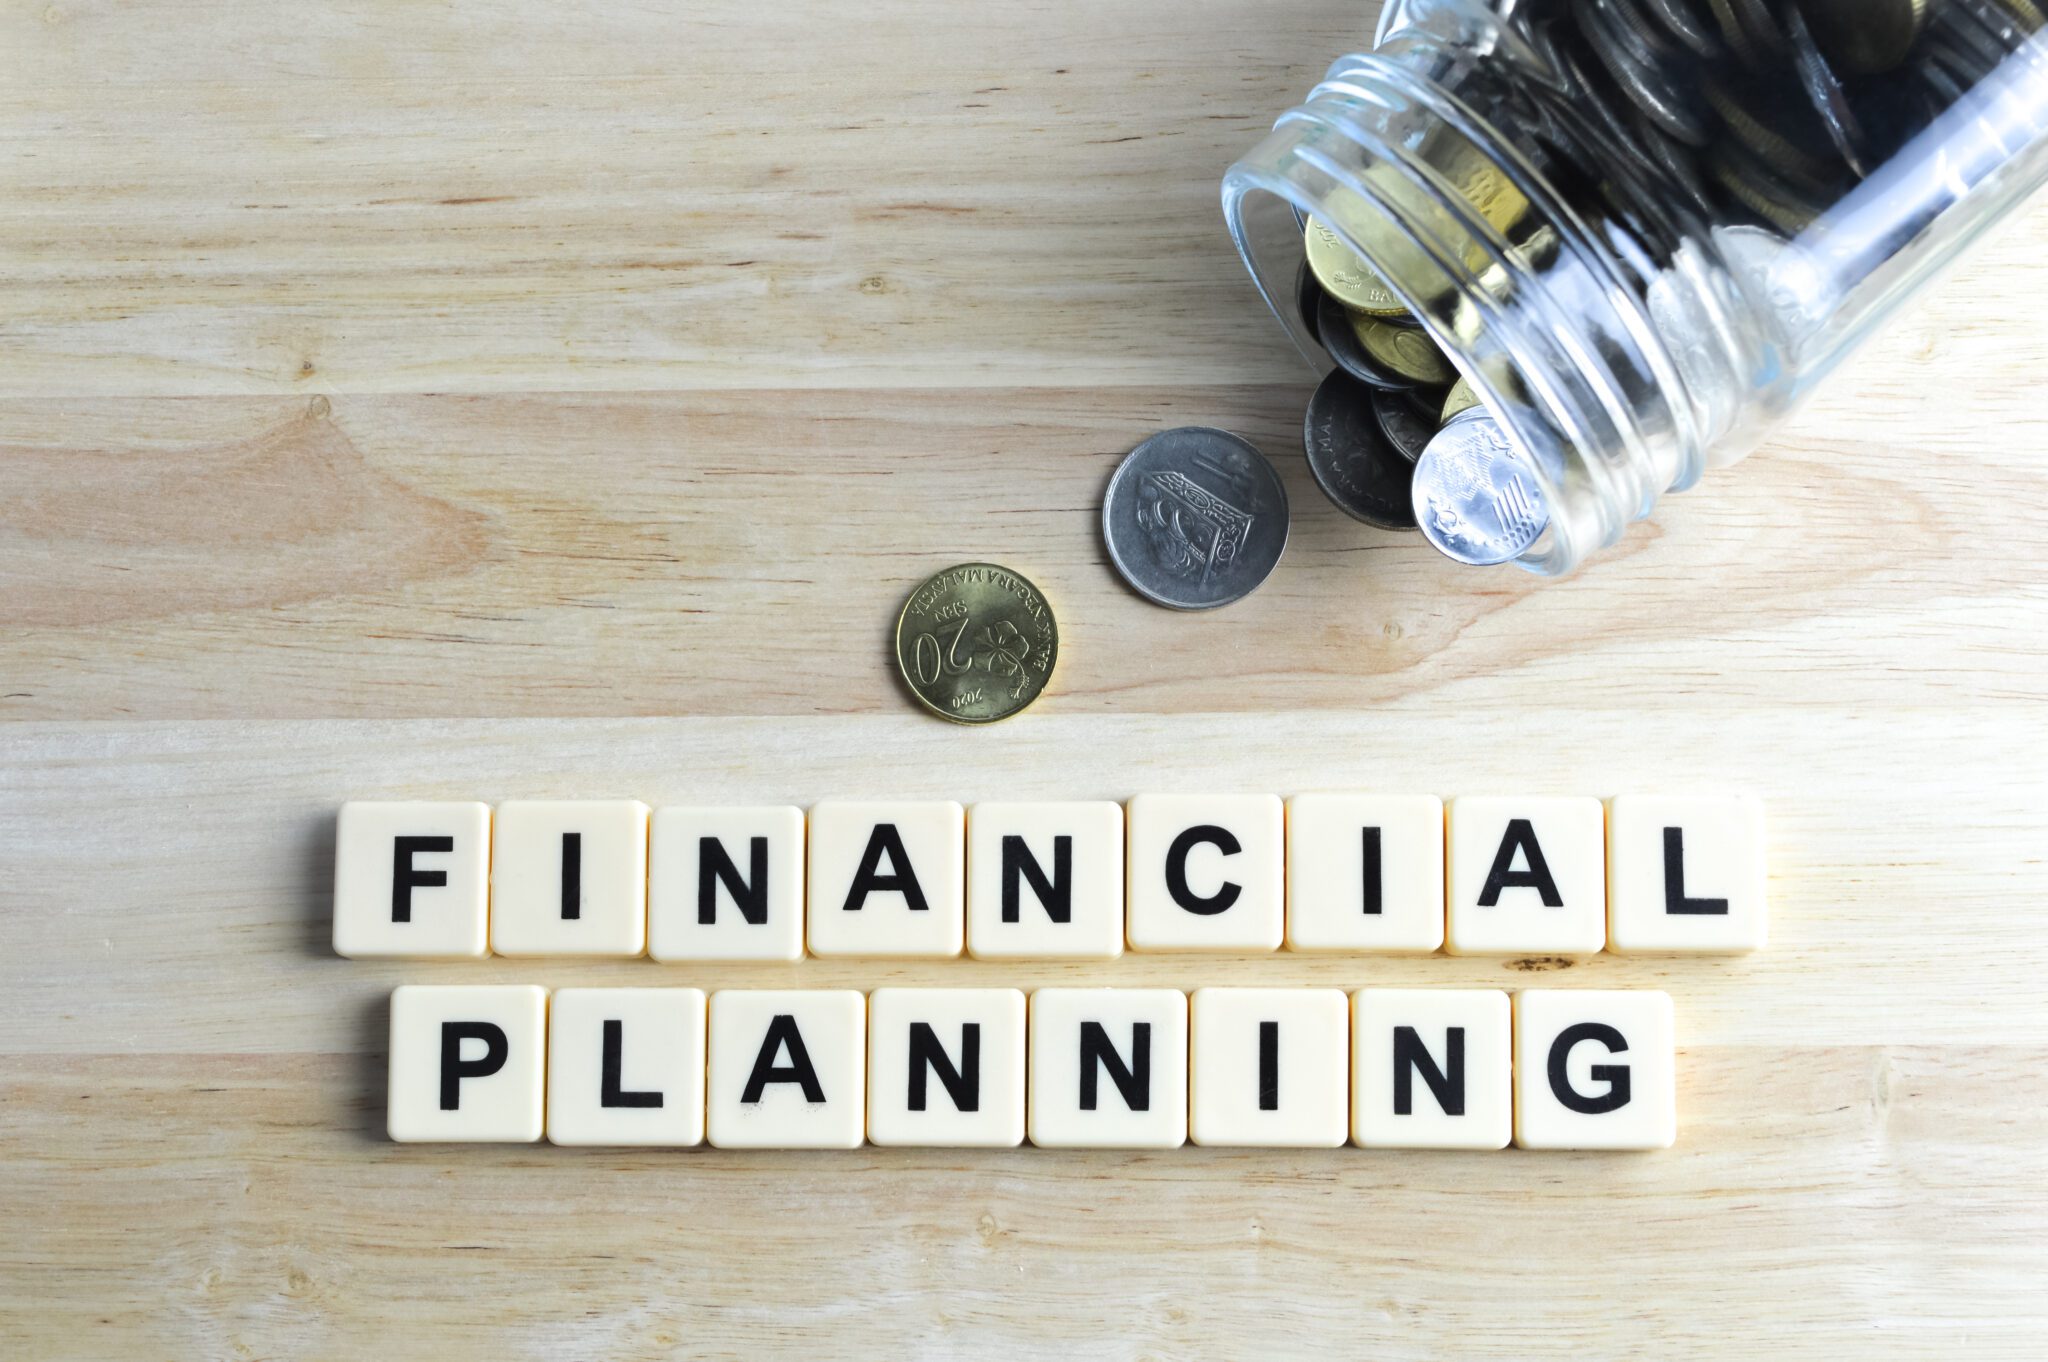 Stack of coins and scrabble letters with text FINANCIAL PLANNING.